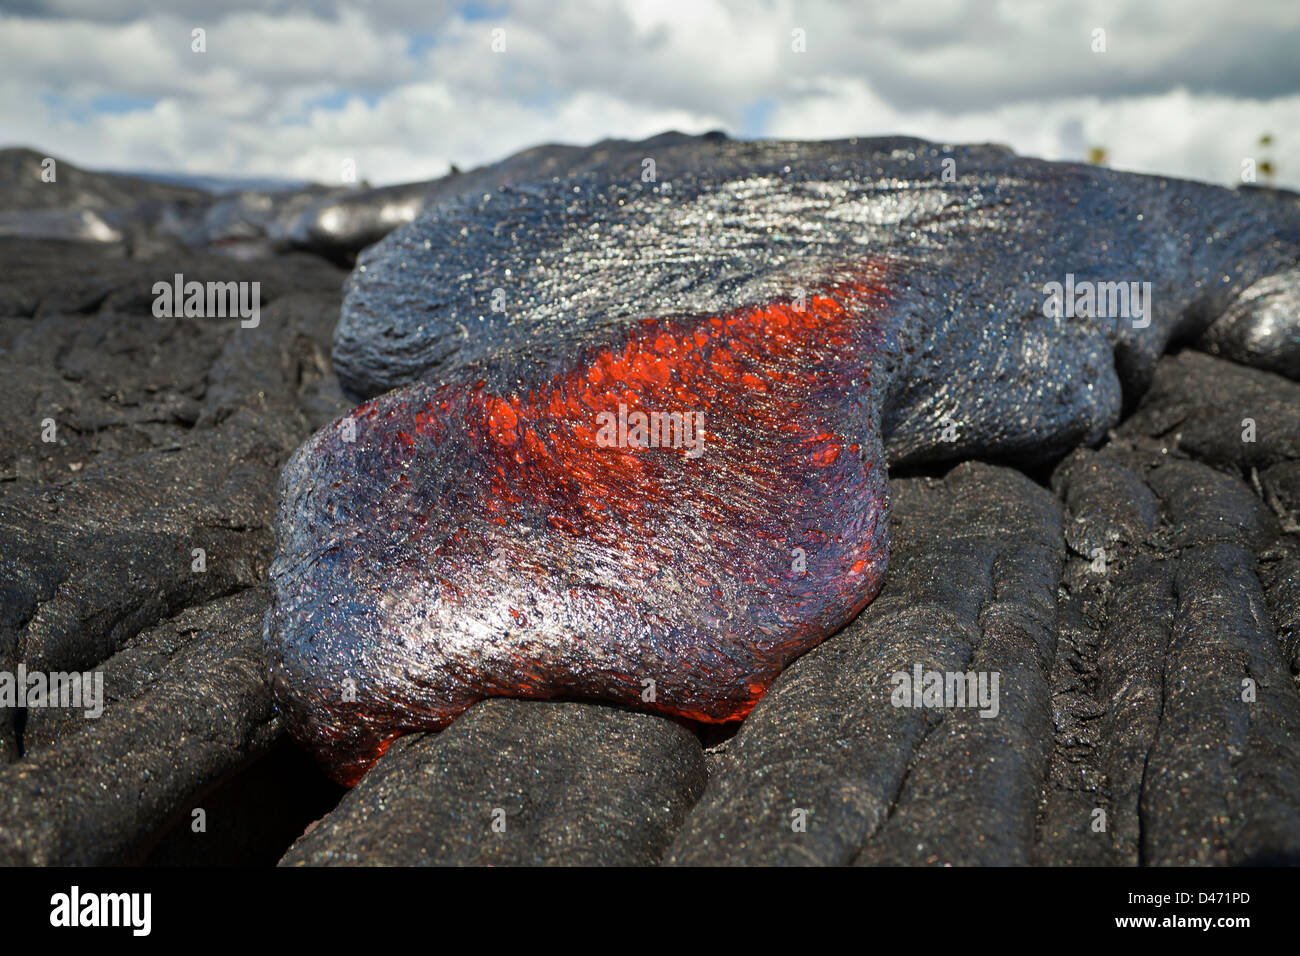 This new Pahoehoe lava flowing from Kilauea is covering an older Pahoehoe flow near Kalapana, Big Island, Hawaii. Stock Photo